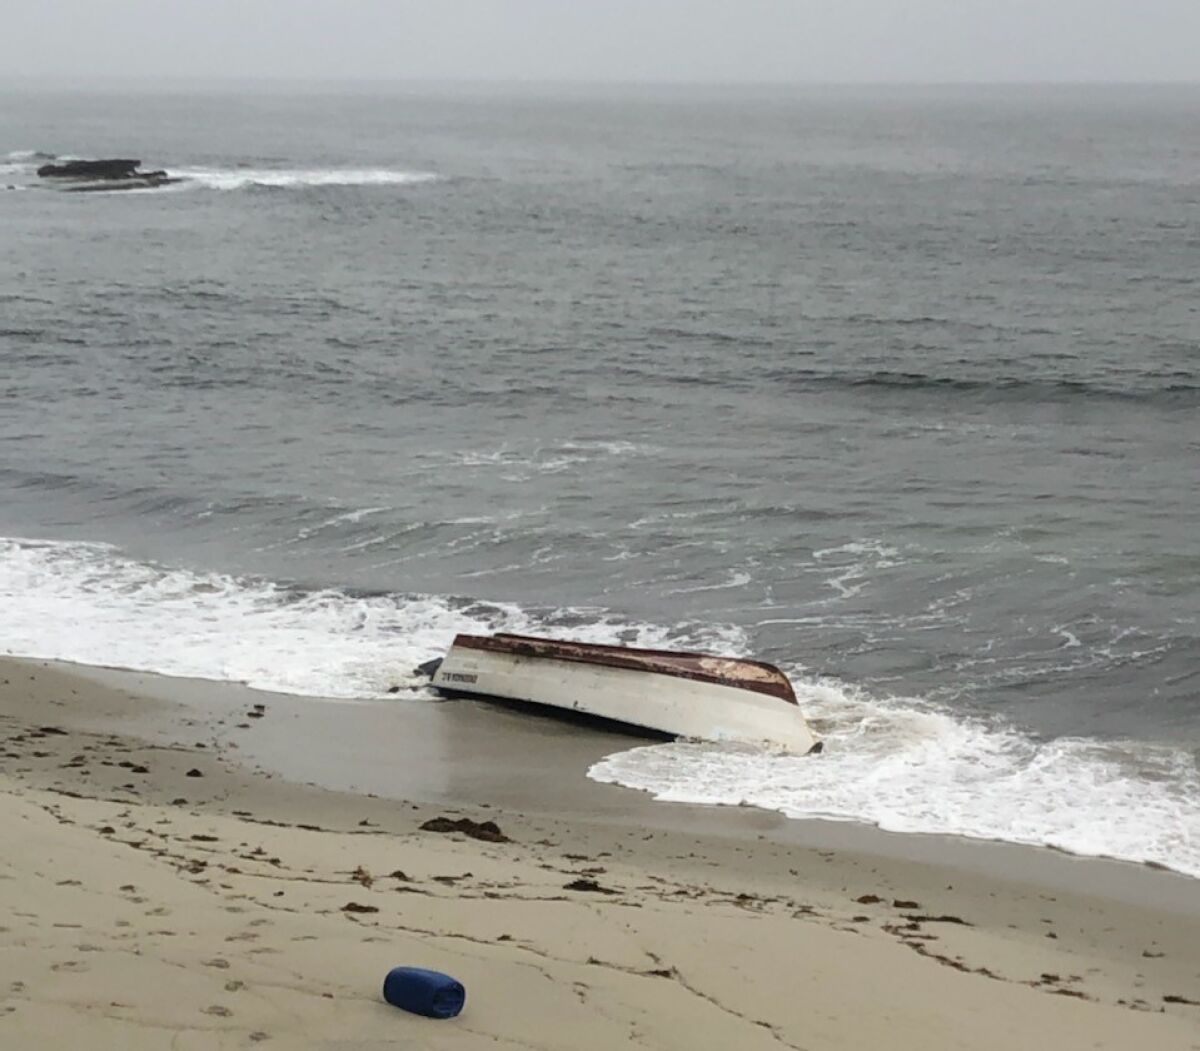 Border Patrol agents found an abandoned panga near Windansea Beach in San Diego early Monday, officials said.